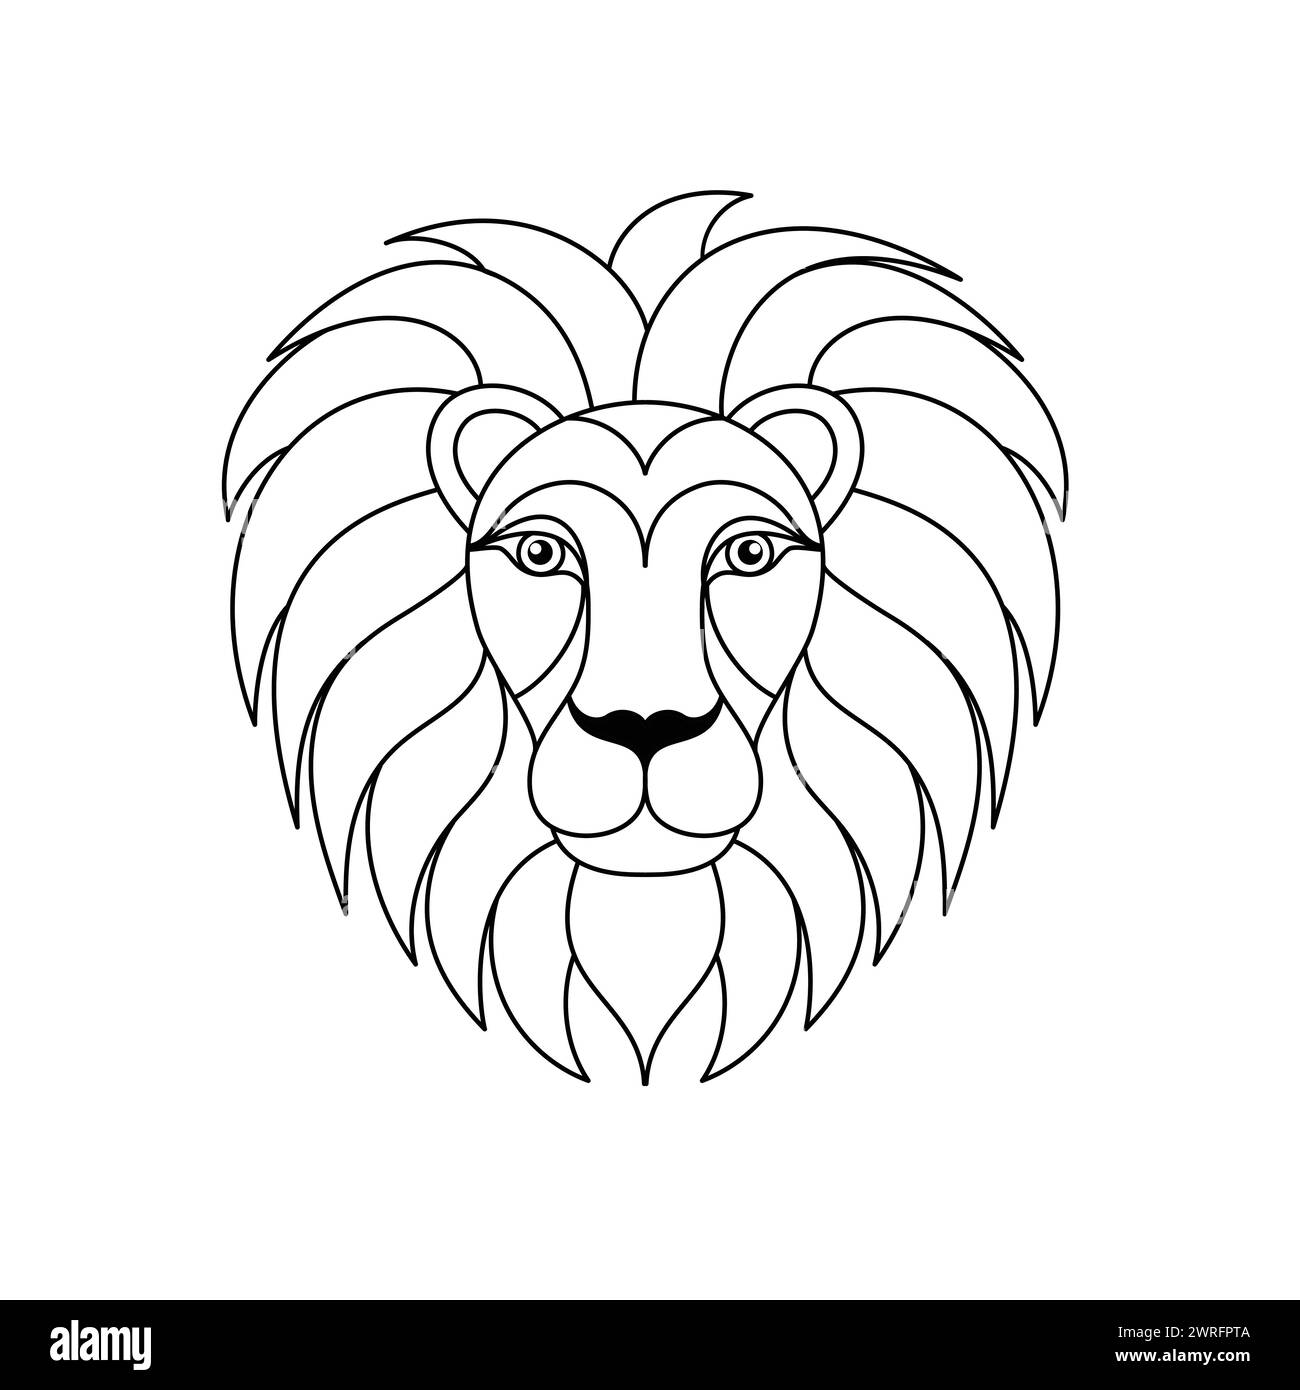 Lion icon in linear style on white background. Stock Vector